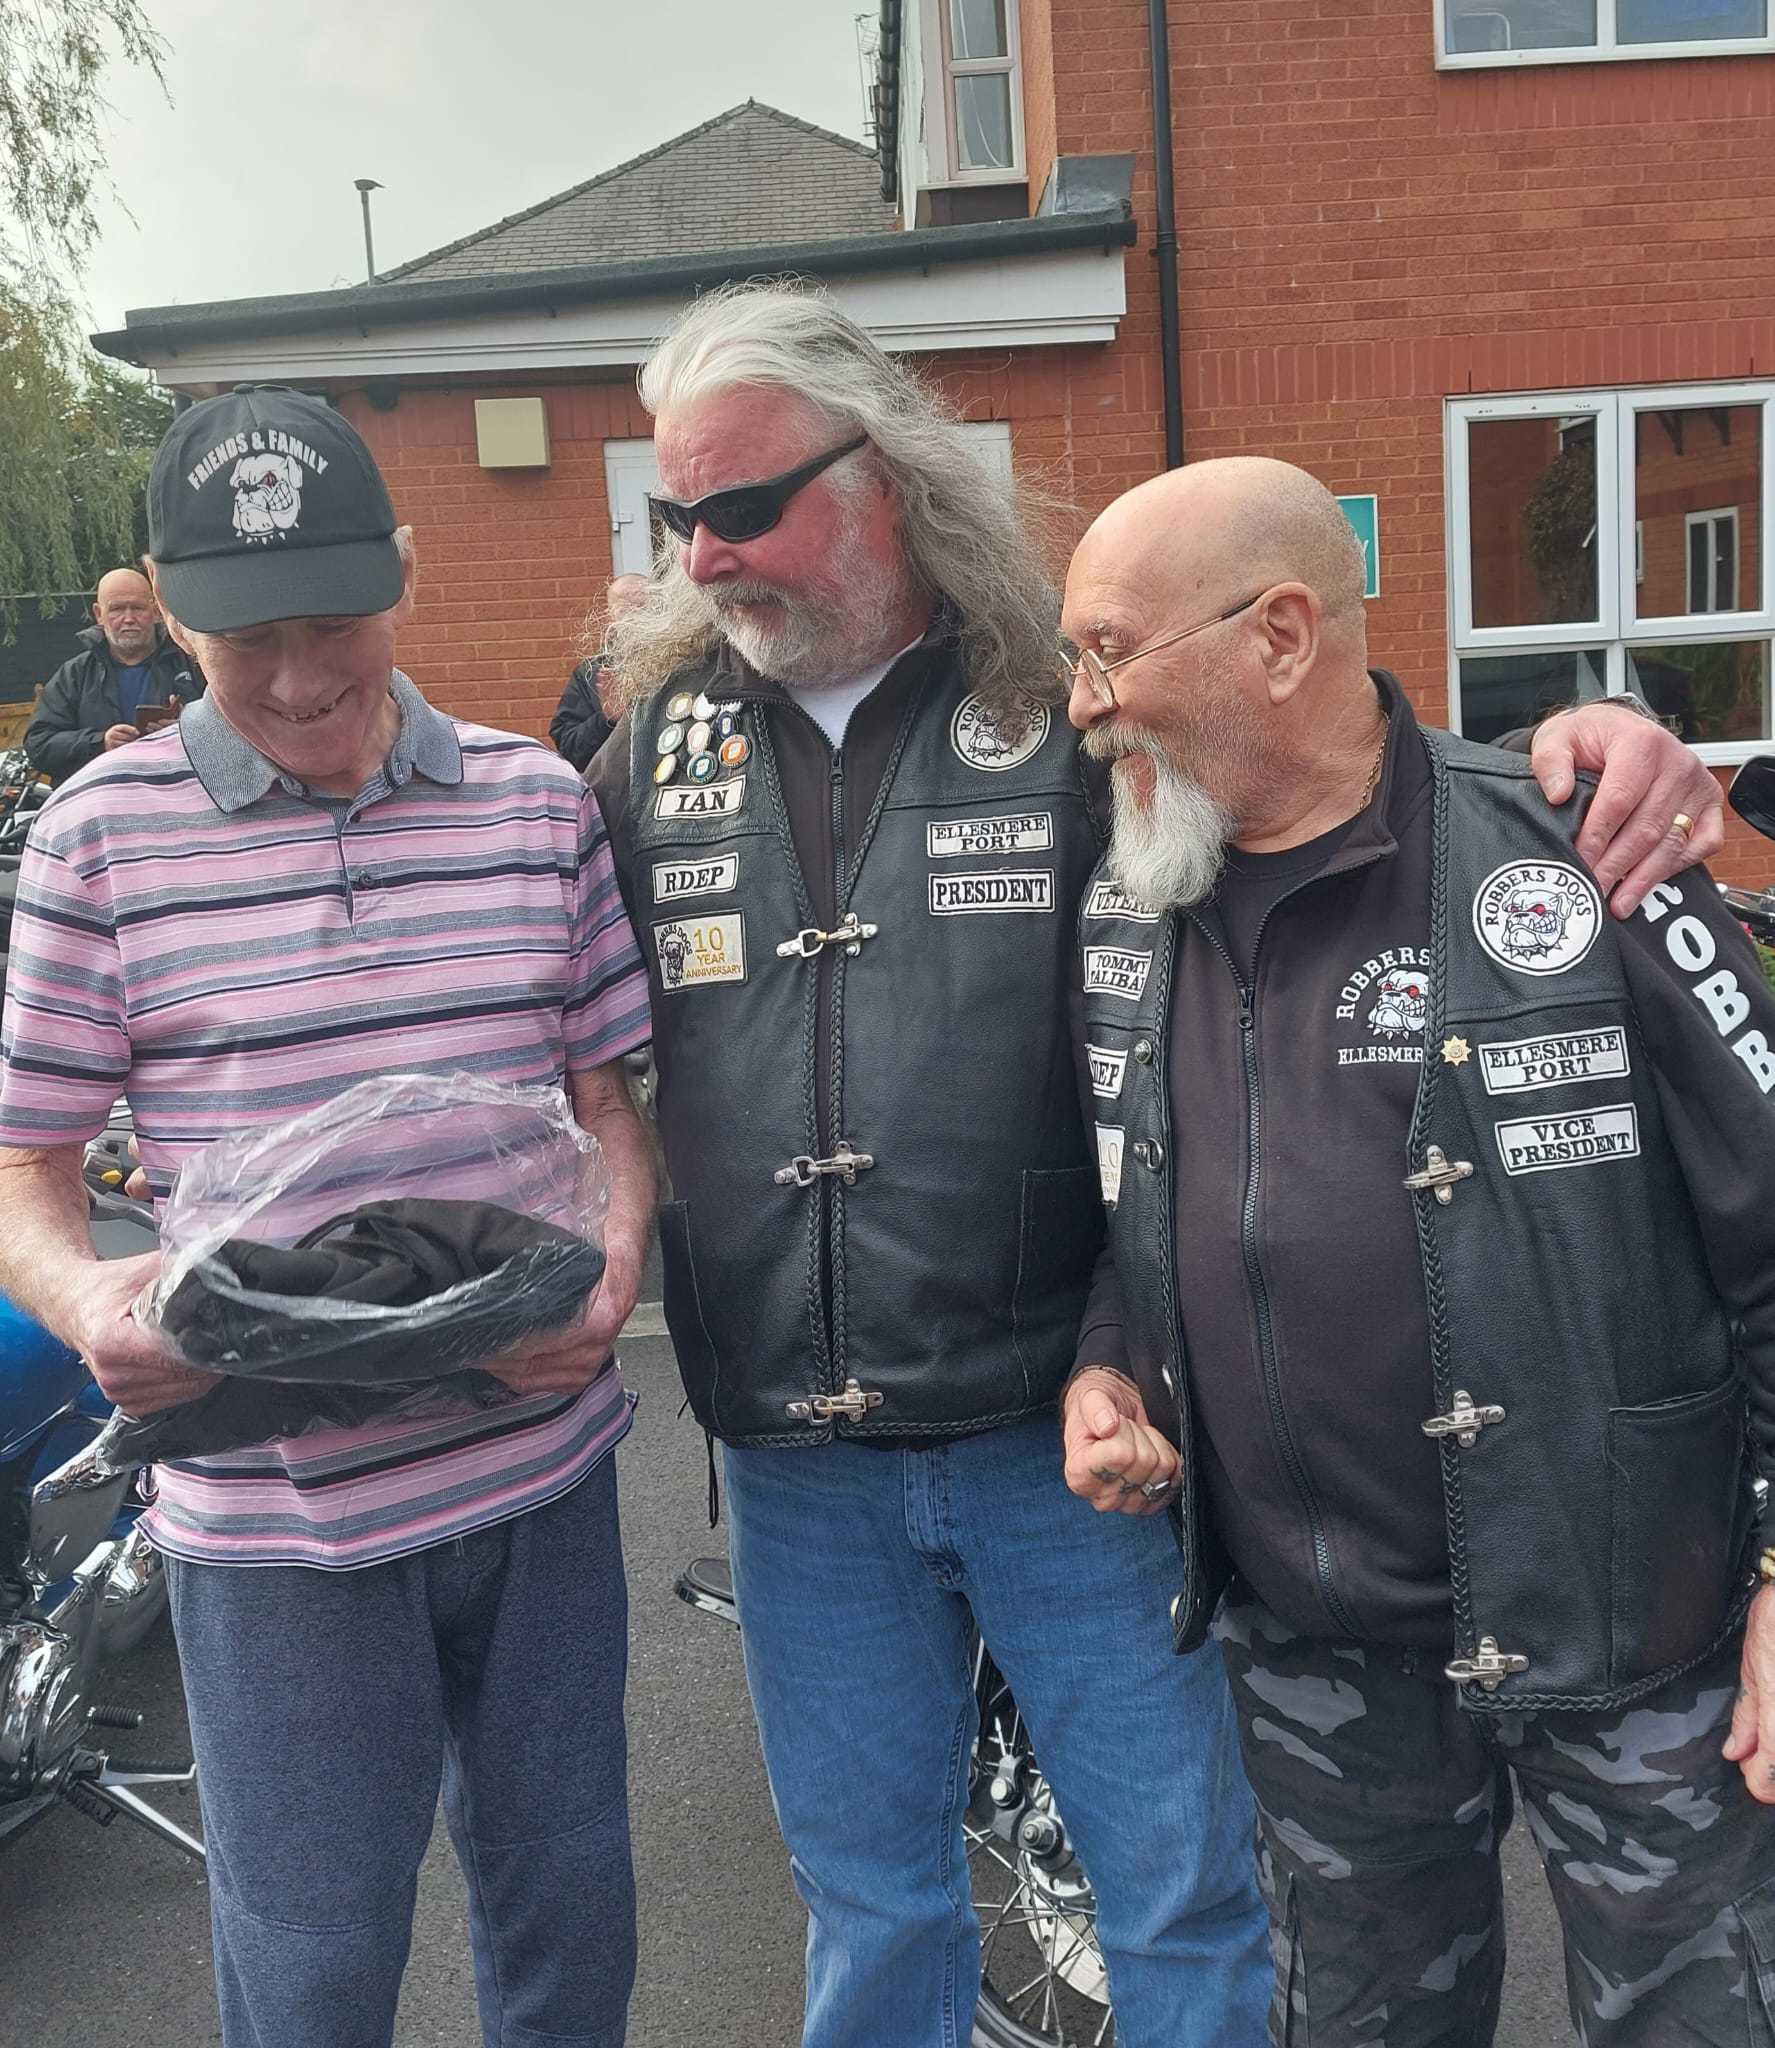 Aaron Court Care Home resident Spike Maloney (left) receives gifts from two members of the Robbers Dogs community motorcycle group for his 77th birthday.